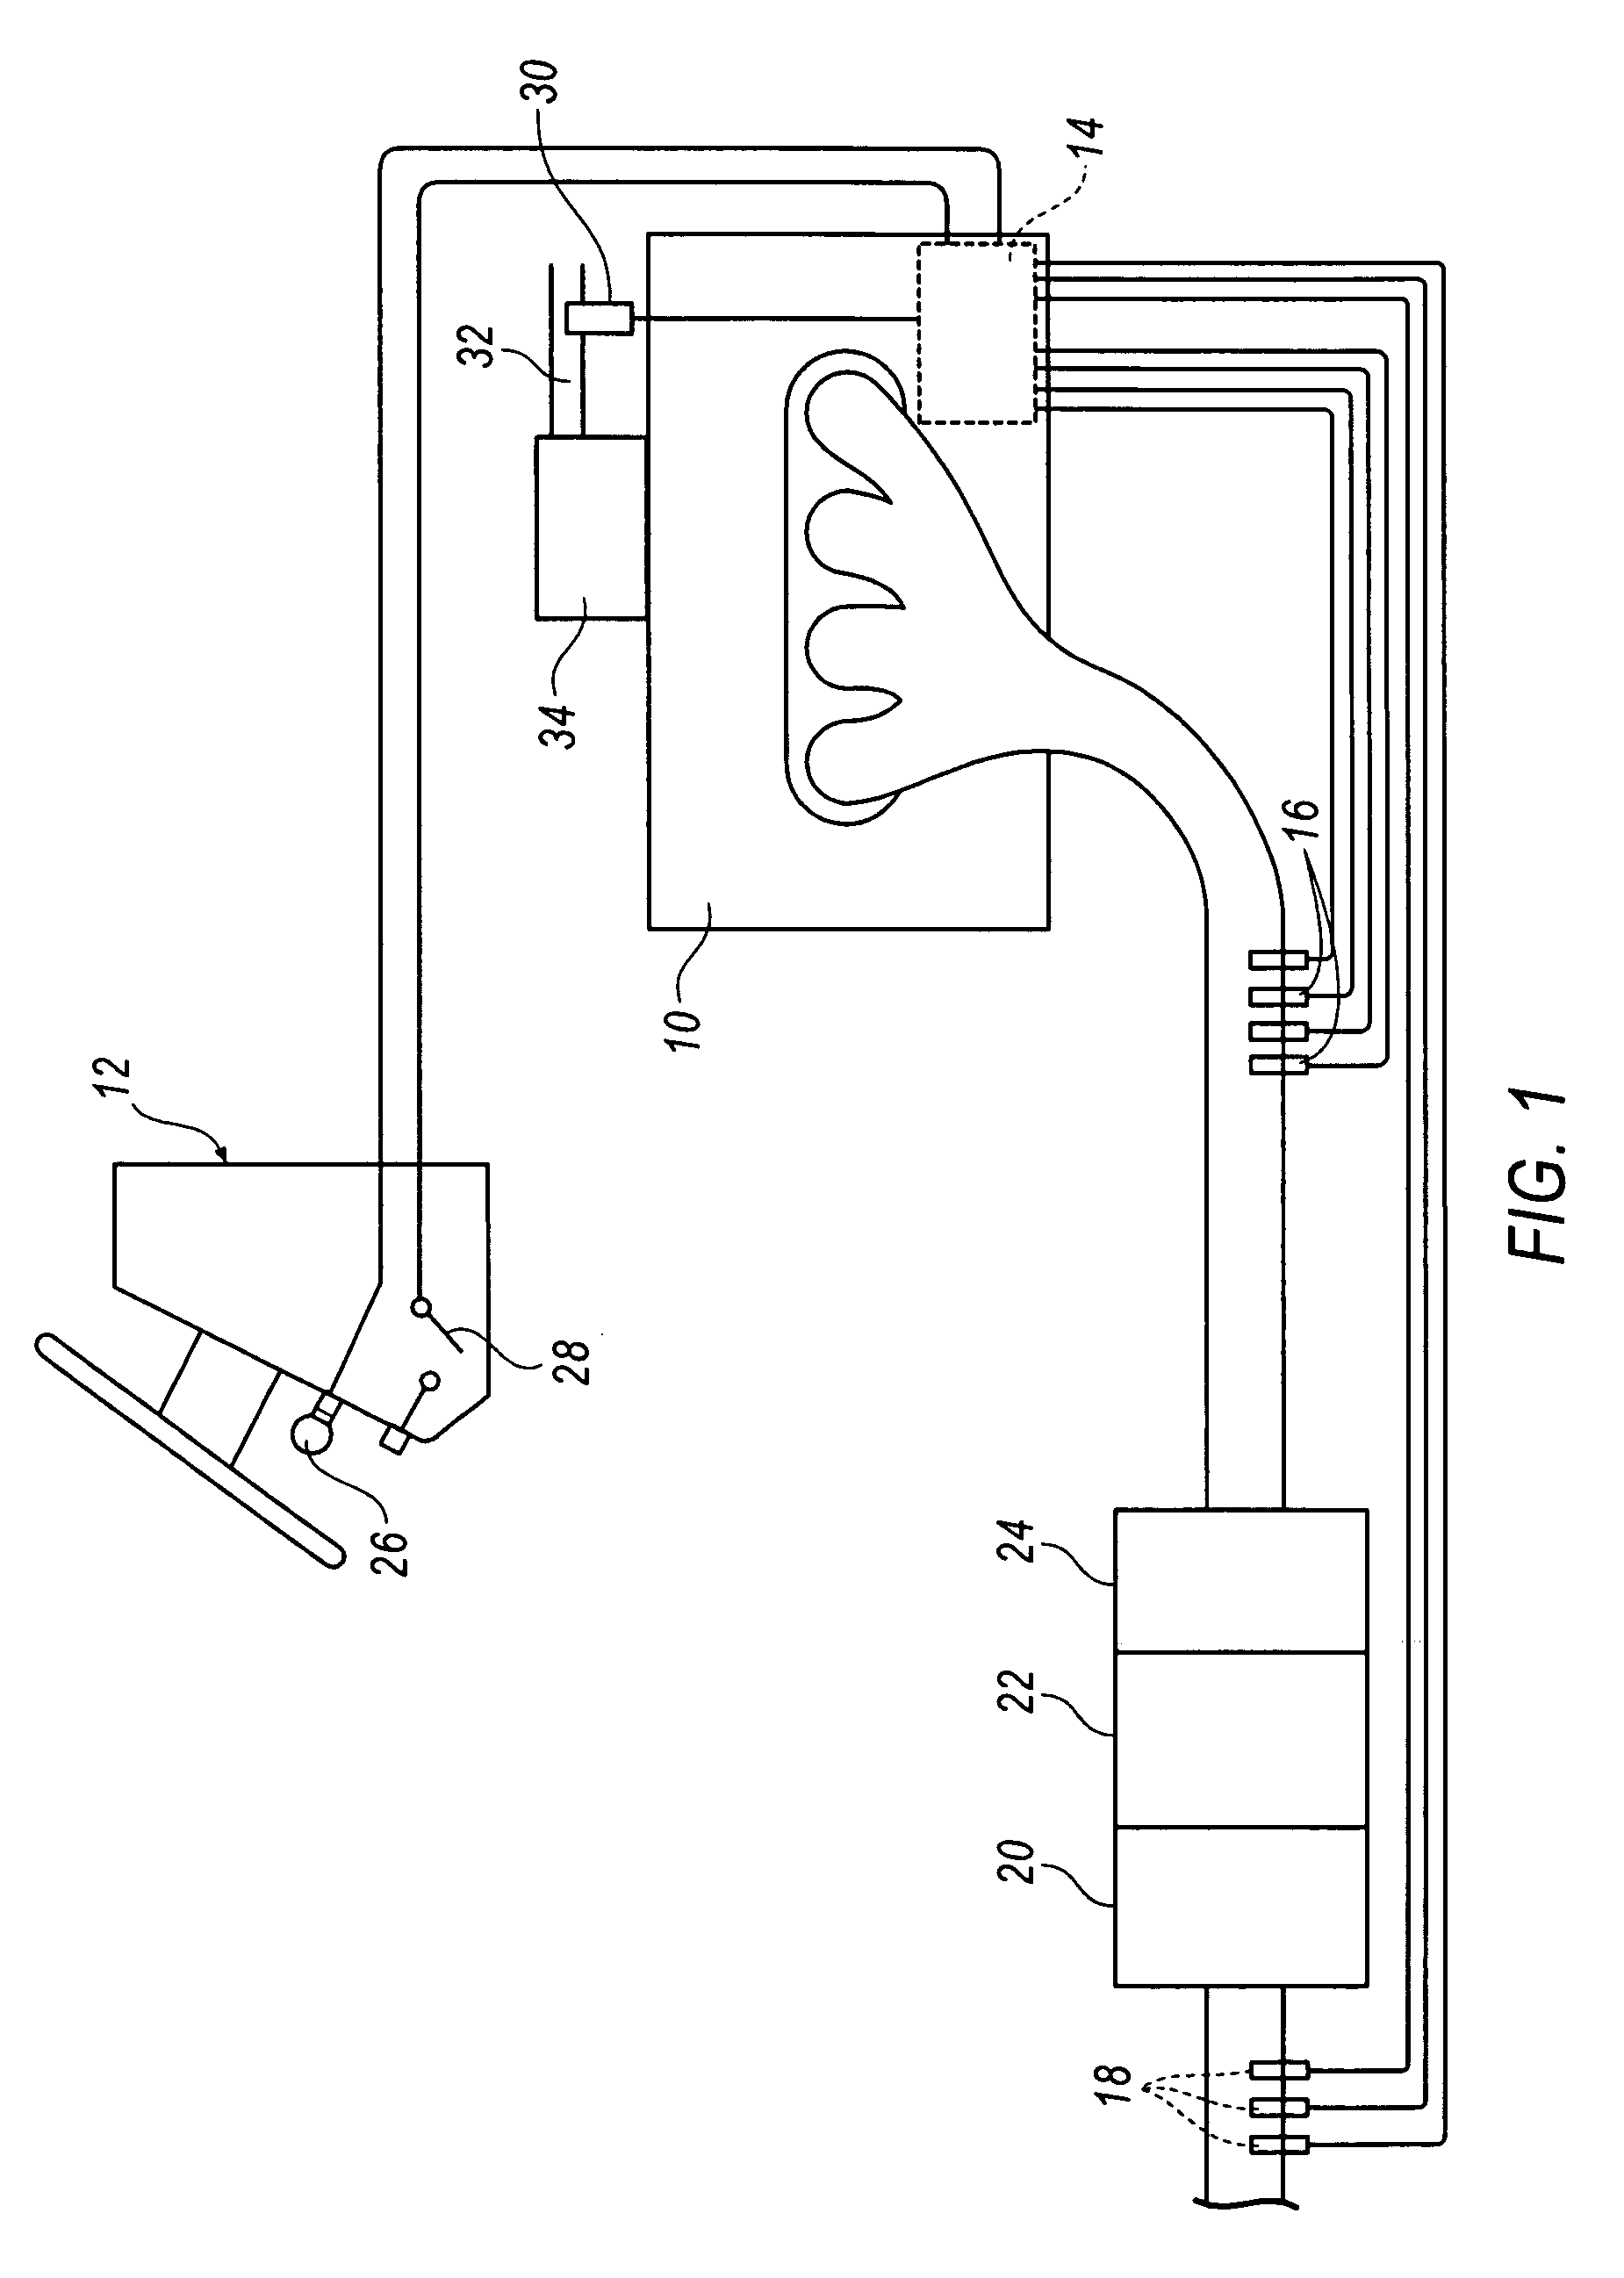 Method and system for regenerating exhaust system filtering and catalyst components using variable high engine idle